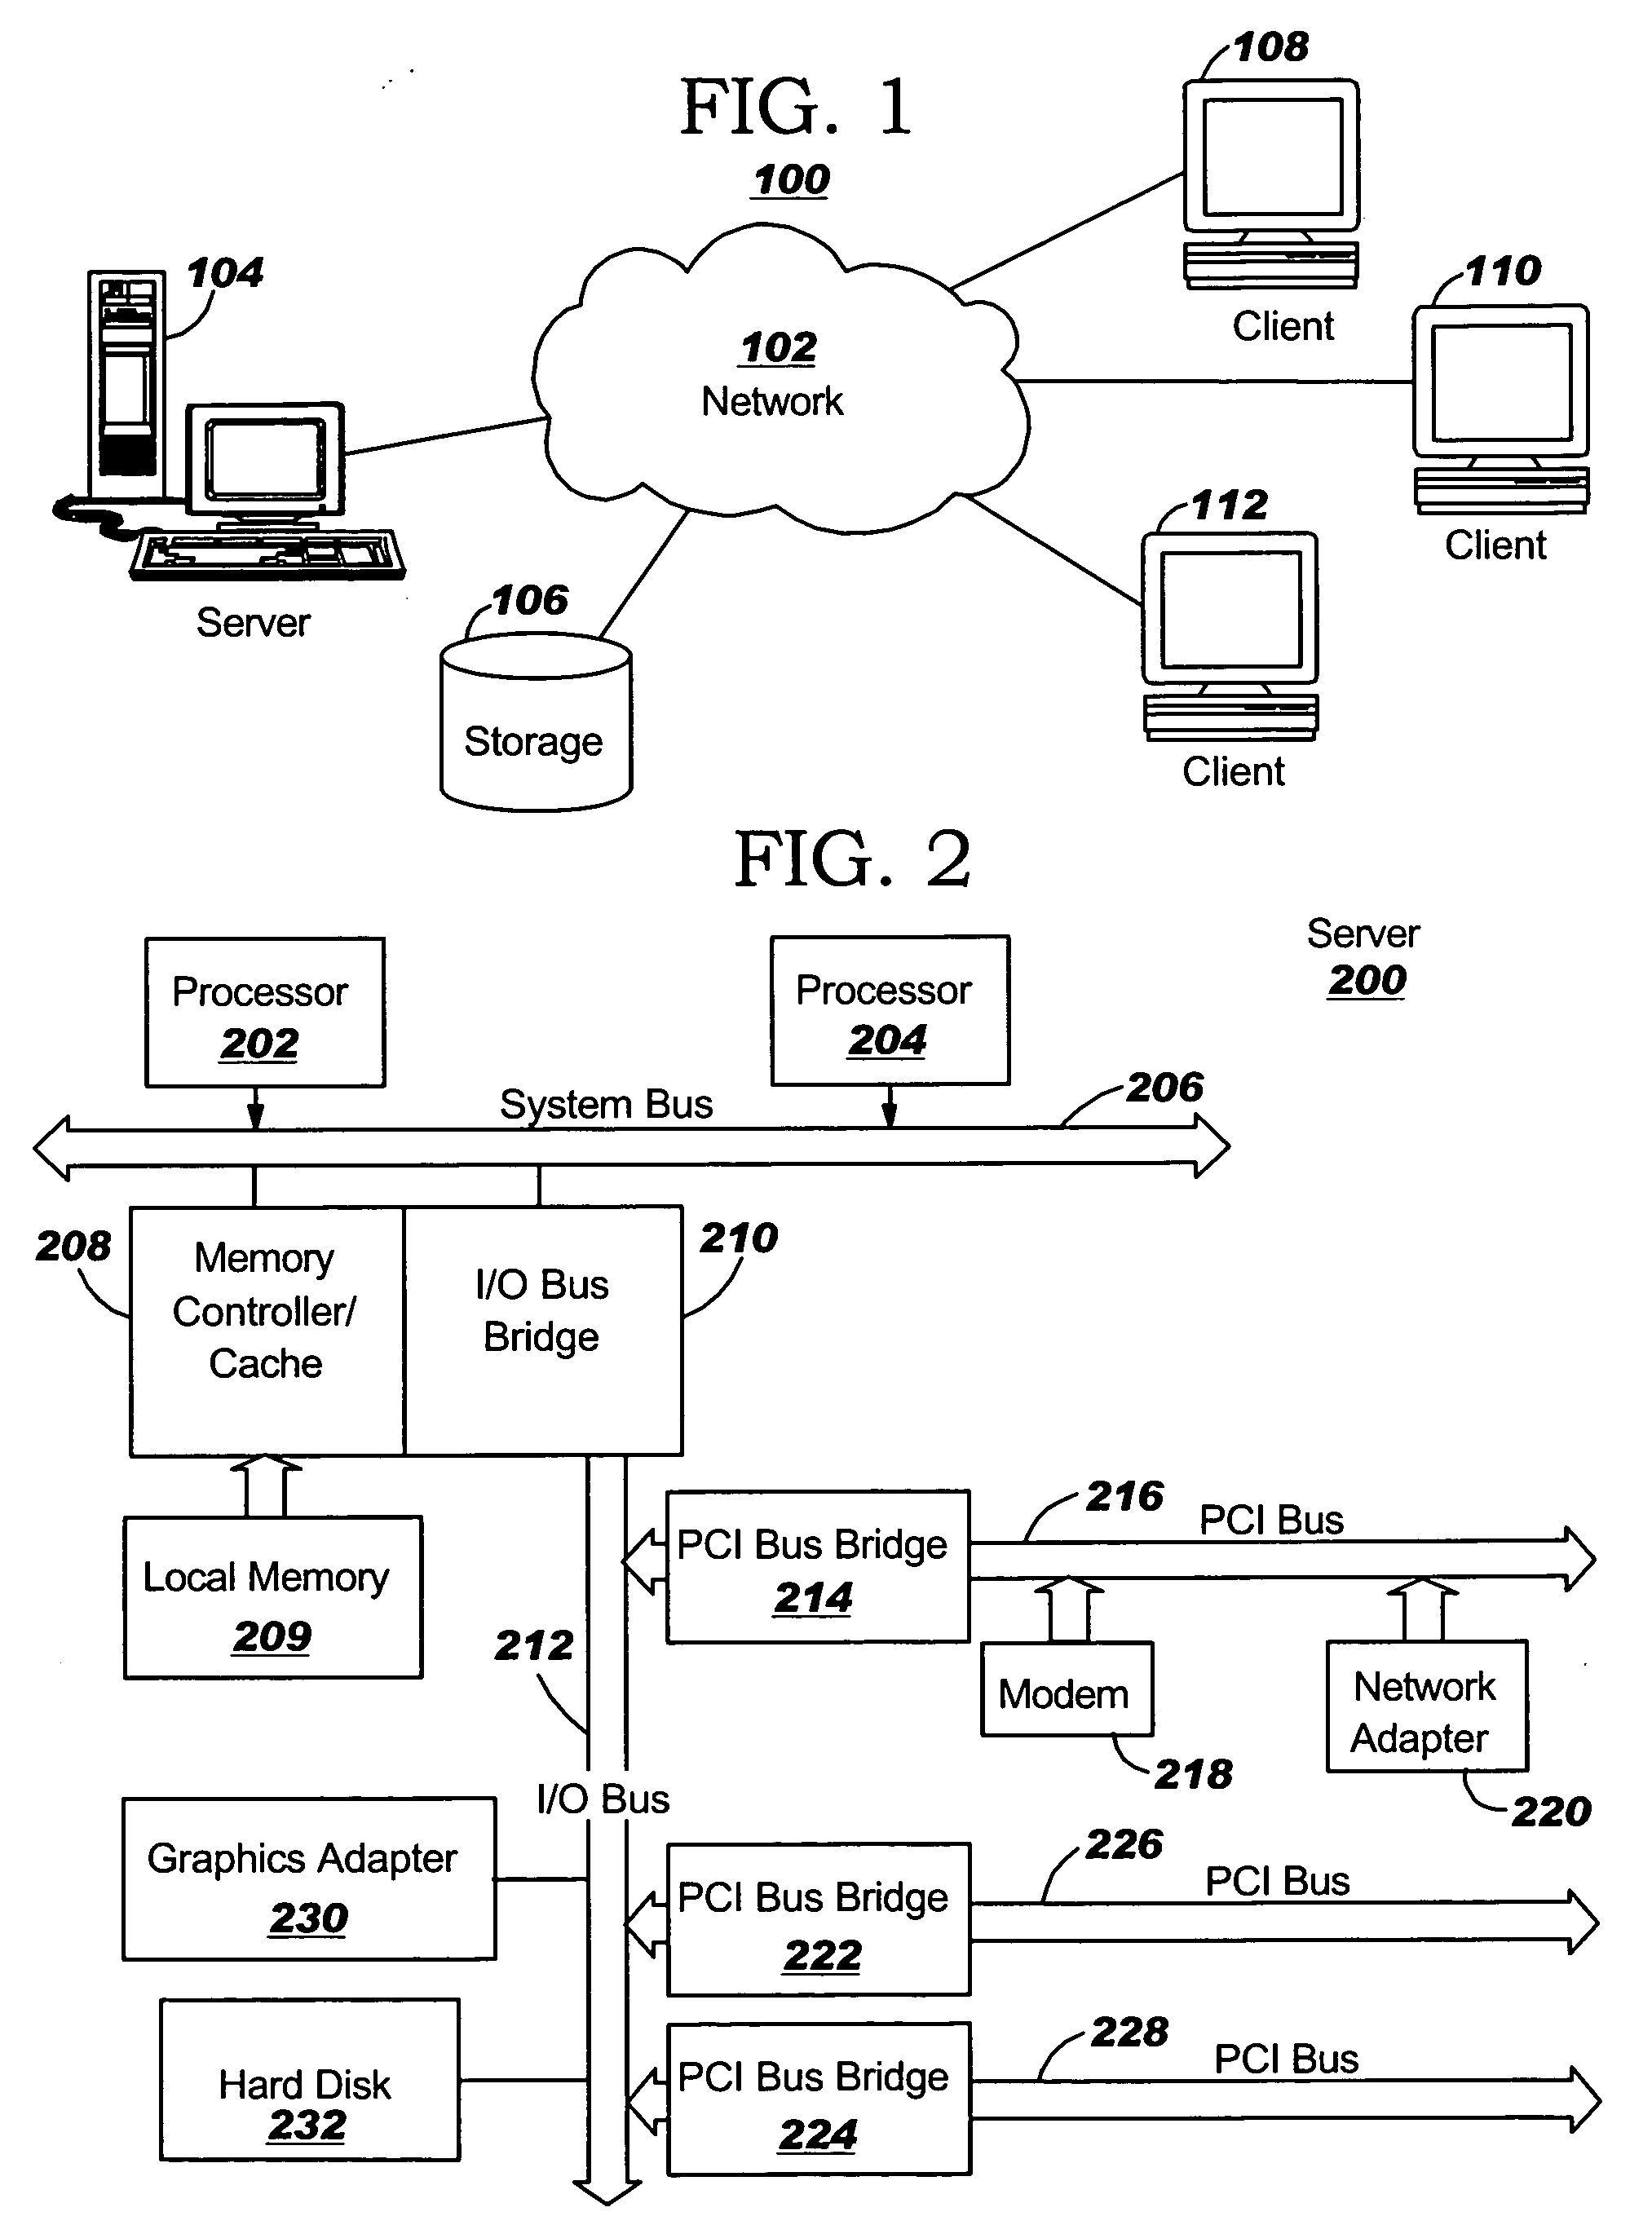 Method and apparatus for updating a portal page